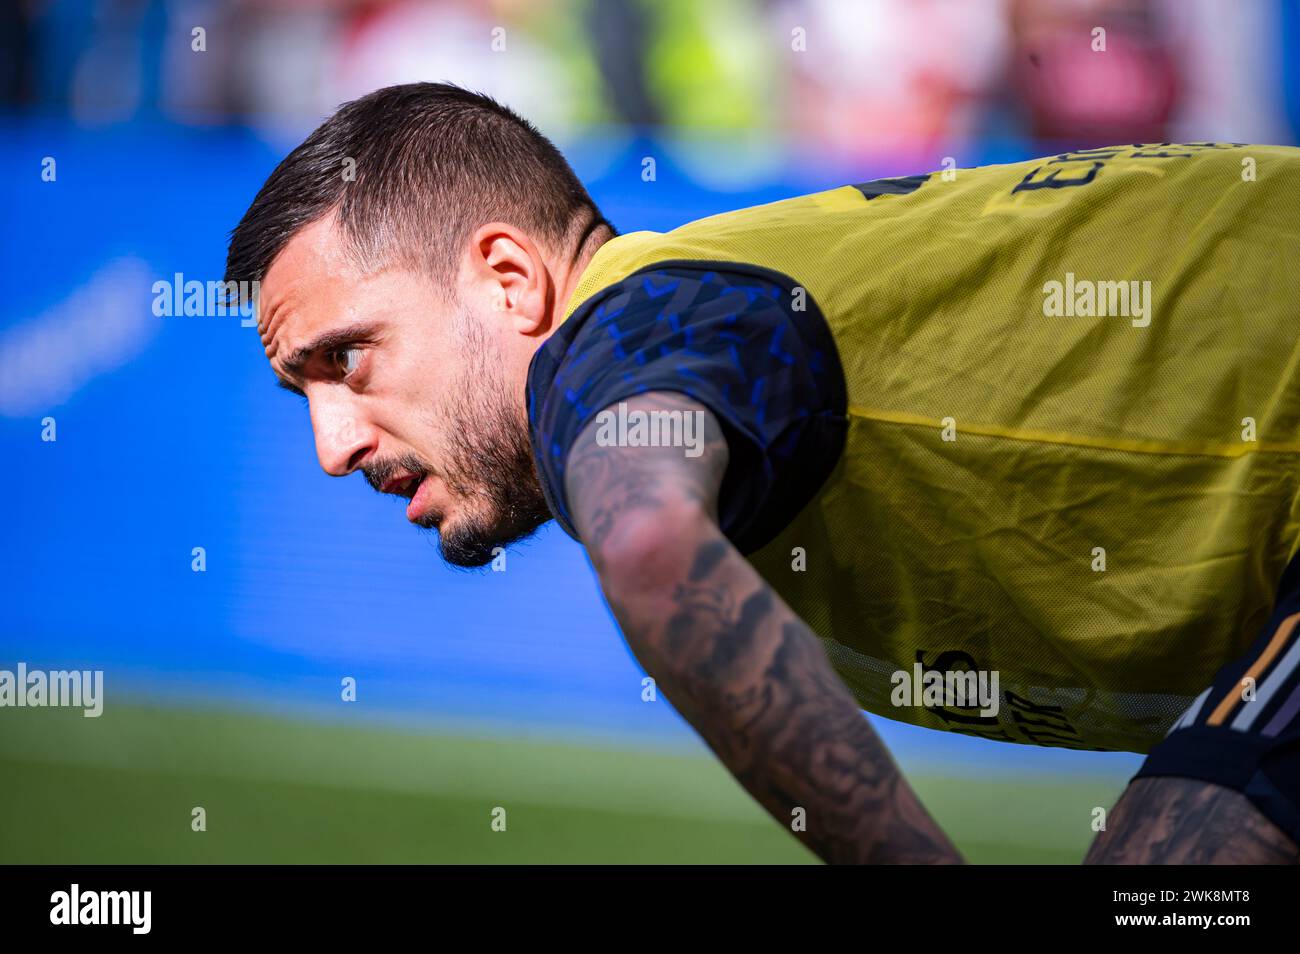 Jose Luis Sanmartin Mato (Joselu) of Real Madrid seen in action during the La Liga EA Sports 2023/24 football match between Rayo Vallecano and Real Madrid at Estadio Vallecas. Rayo Vallecano 1 : 1 Real Madrid Stock Photo